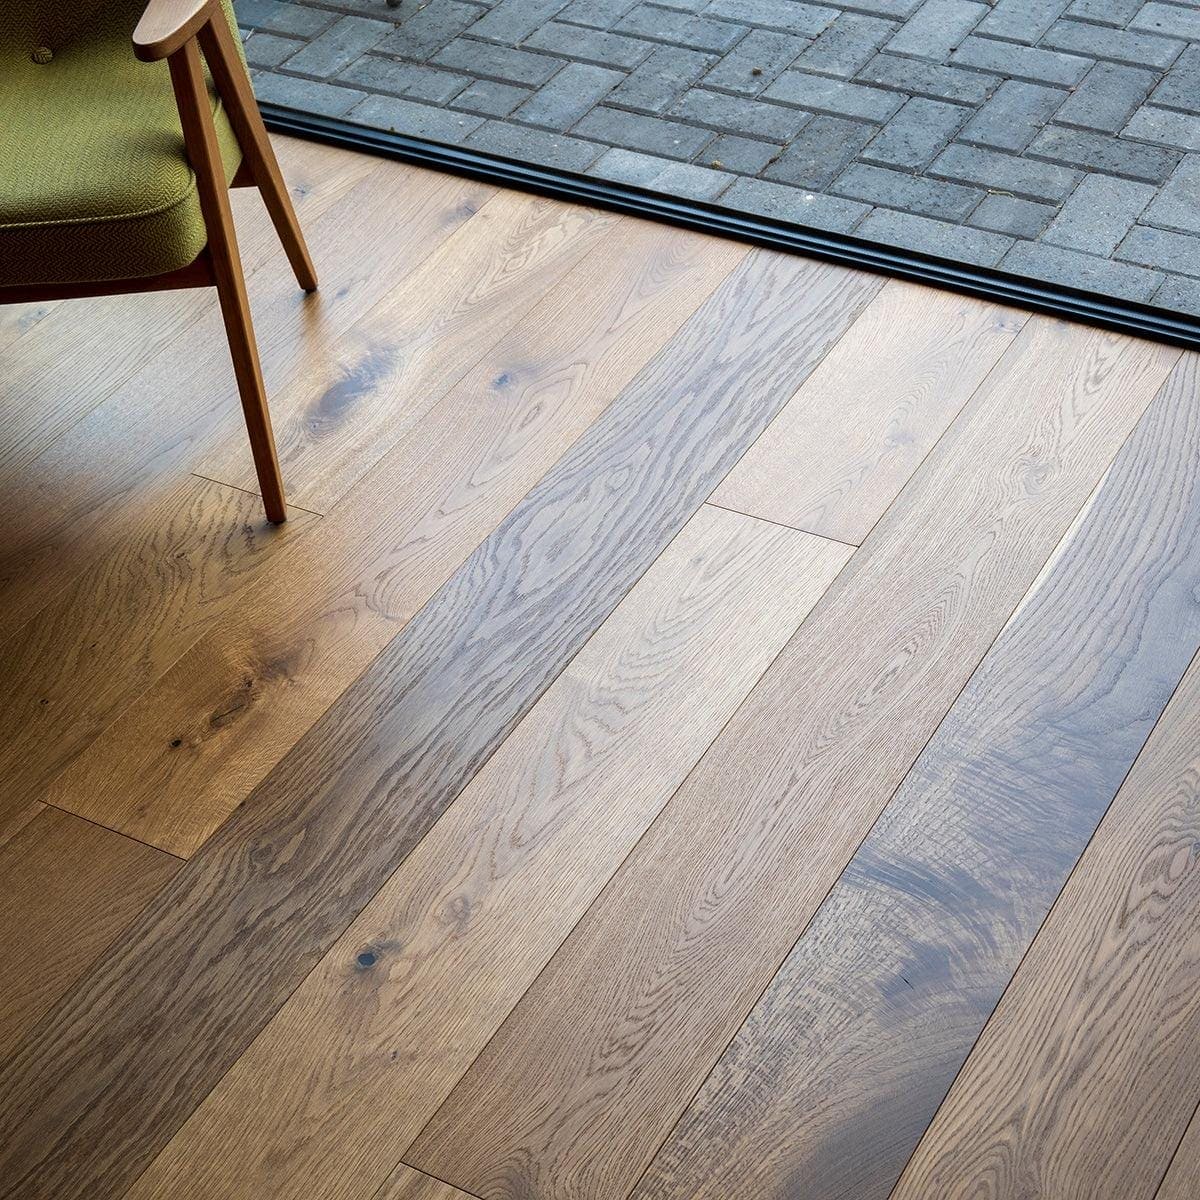 Hyperion Tiles Engineered Flooring 190 x 1900 x 14mm 2.166m2 per pack DC201 Smoked Oak